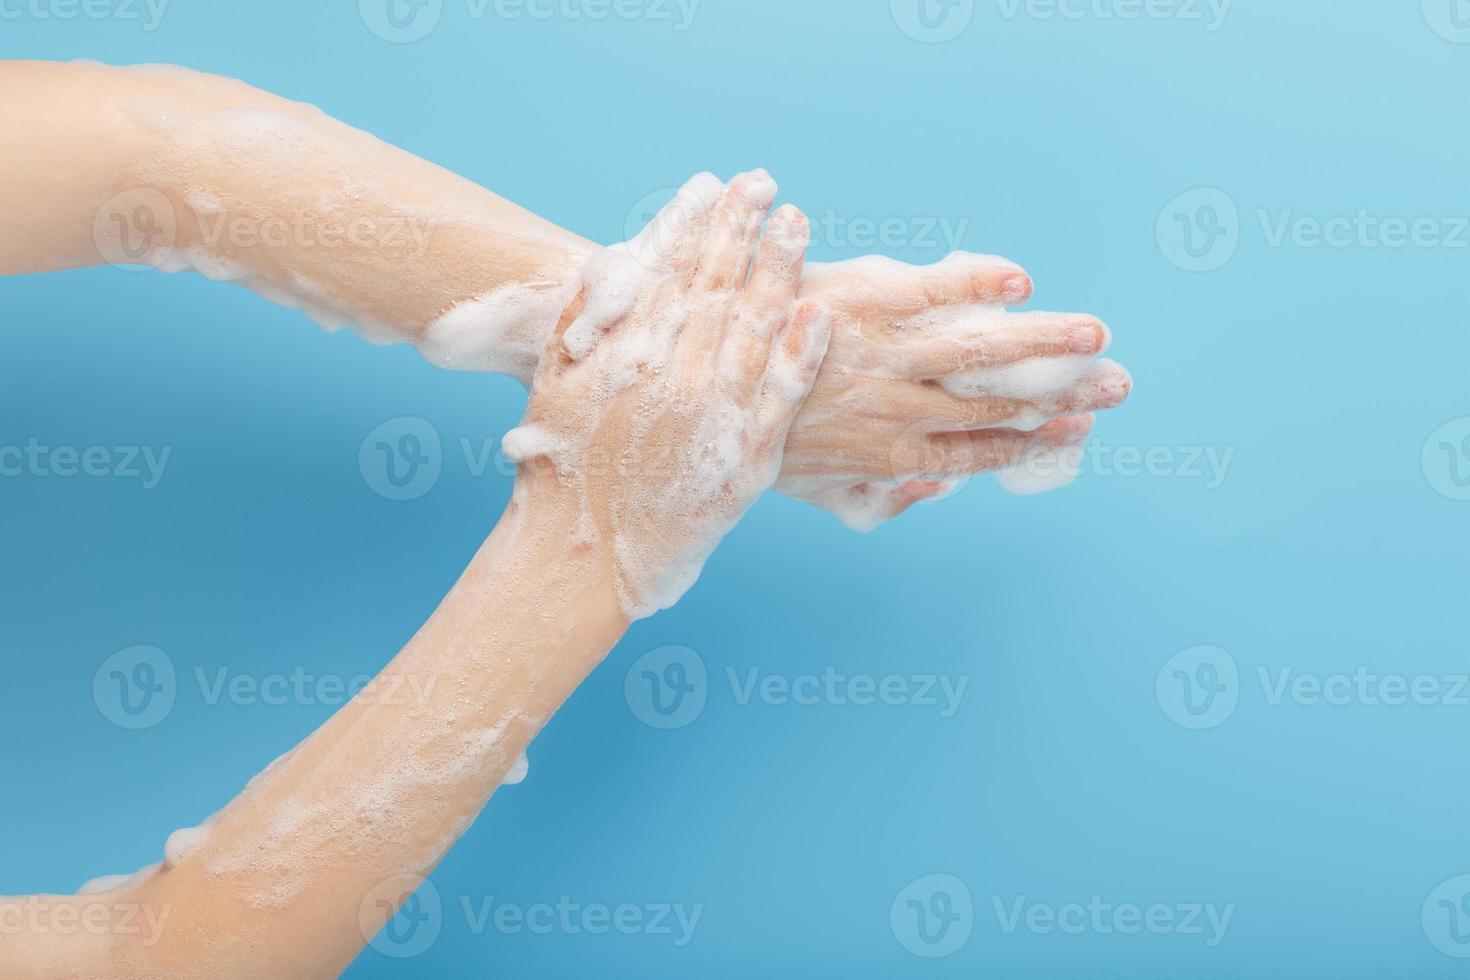 Children's hands in soap suds, on a blue background, top view. photo